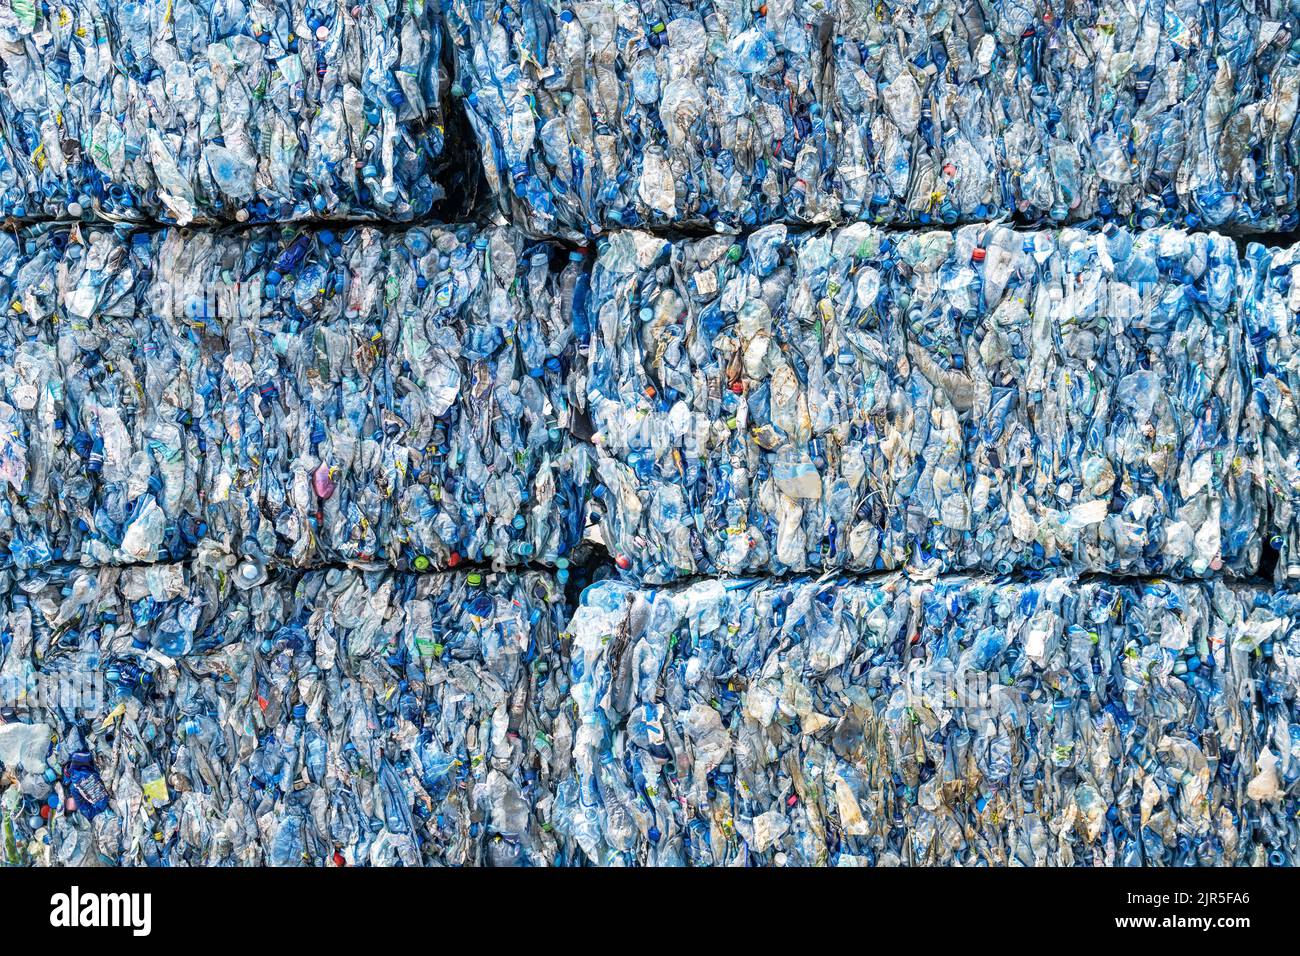 Huge Pile of Pressed PET Bottles Ready For Recycling Process. Urban Waste Management Theme. Stock Photo